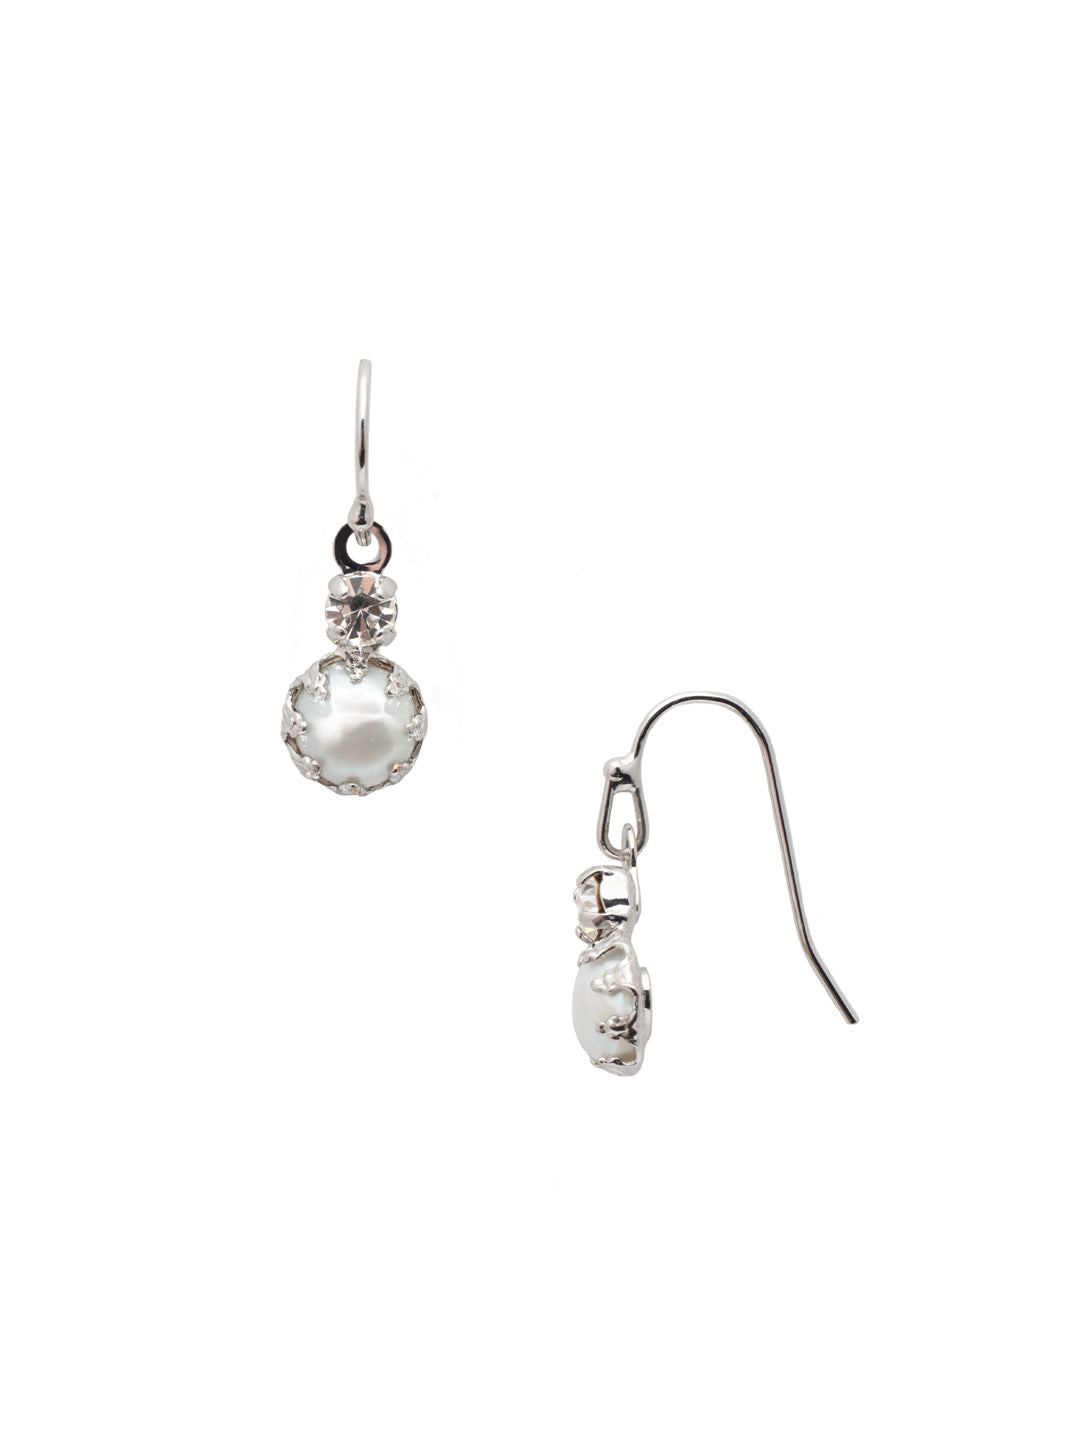 Kit Mini Dangle Earring - EEV167PDCRY - <p>The Kit Mini Dangle Earrings feature a single freshwater pearl nestled beneath a sparkling crystal. The dainty design makes it perfect for everyday wear! From Sorrelli's Crystal collection in our Palladium finish.</p>